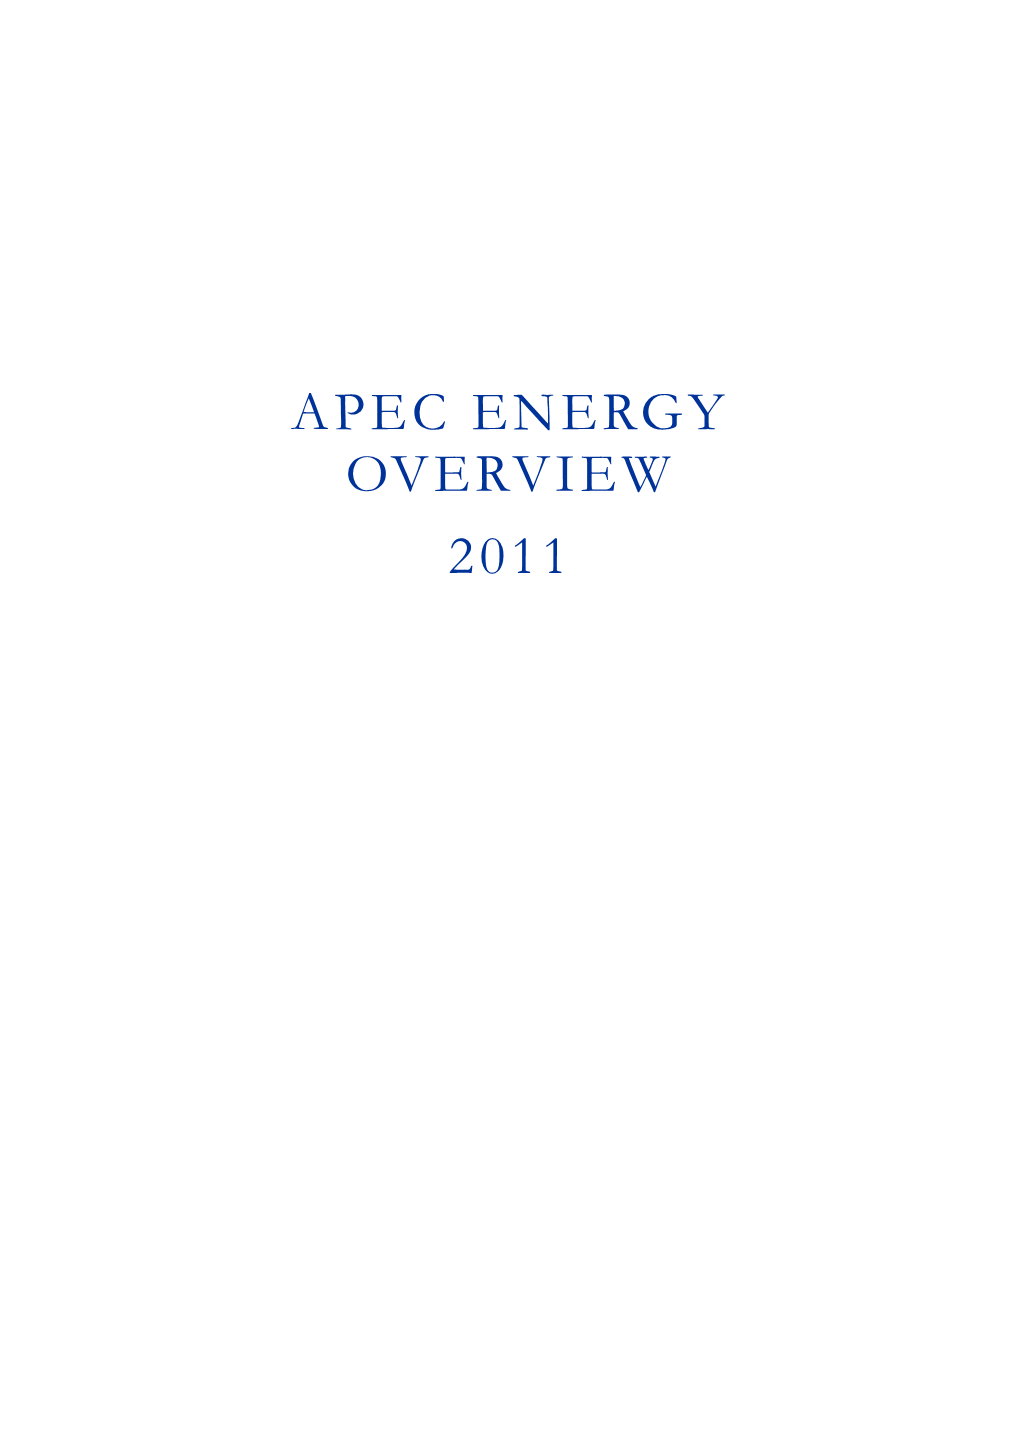 Apec Energy Overview 2011 Foreword